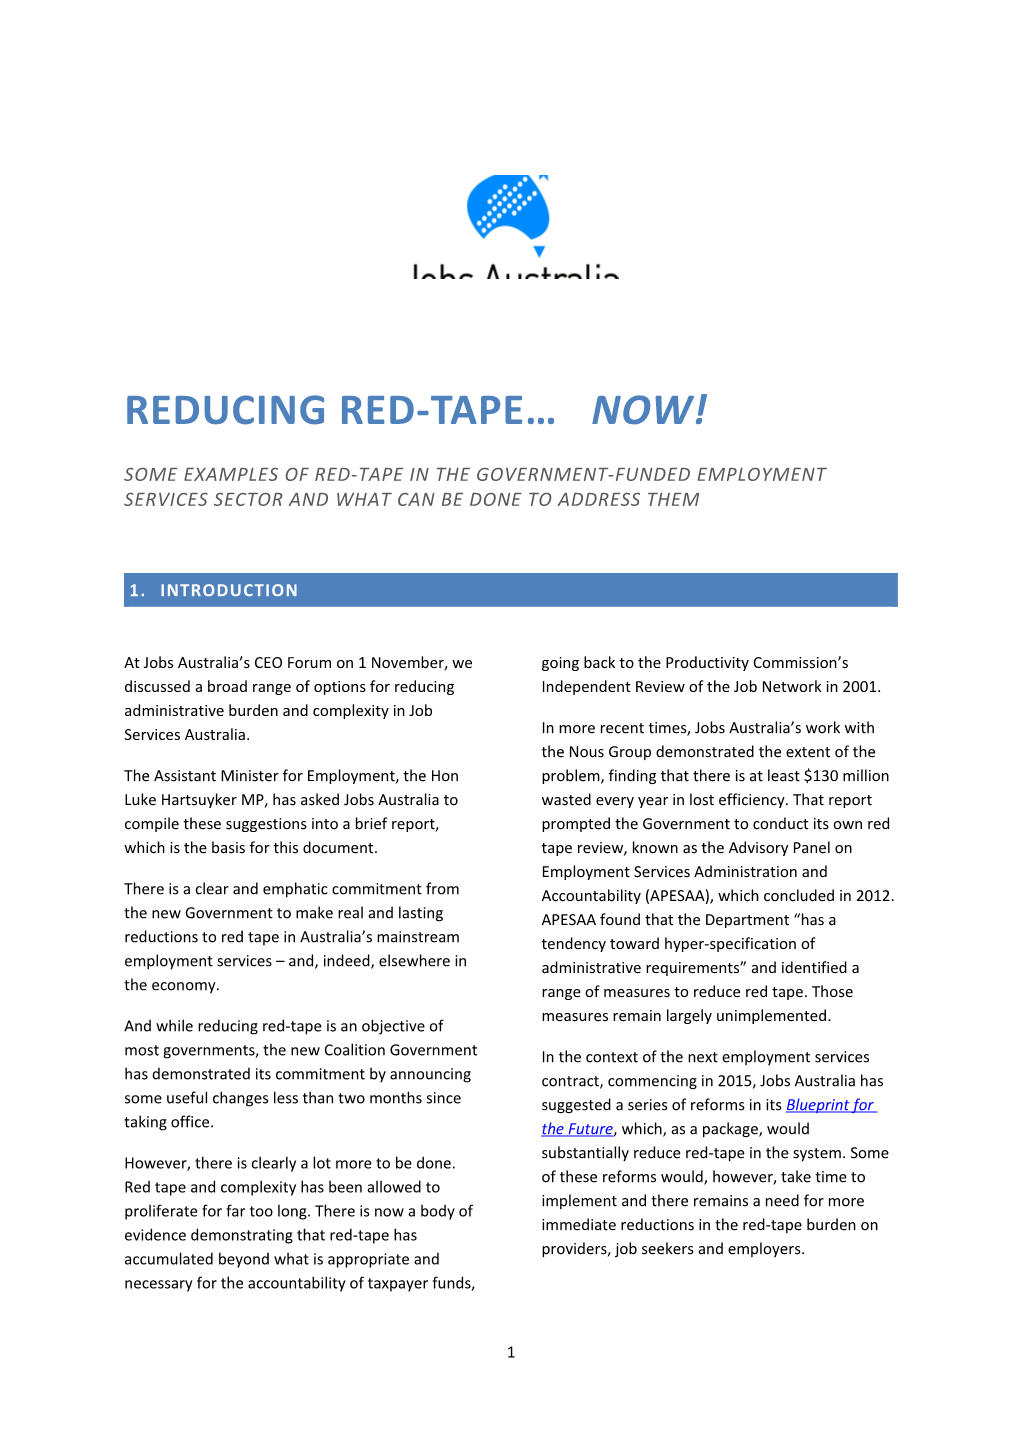 Reducing Red-Tape Now!